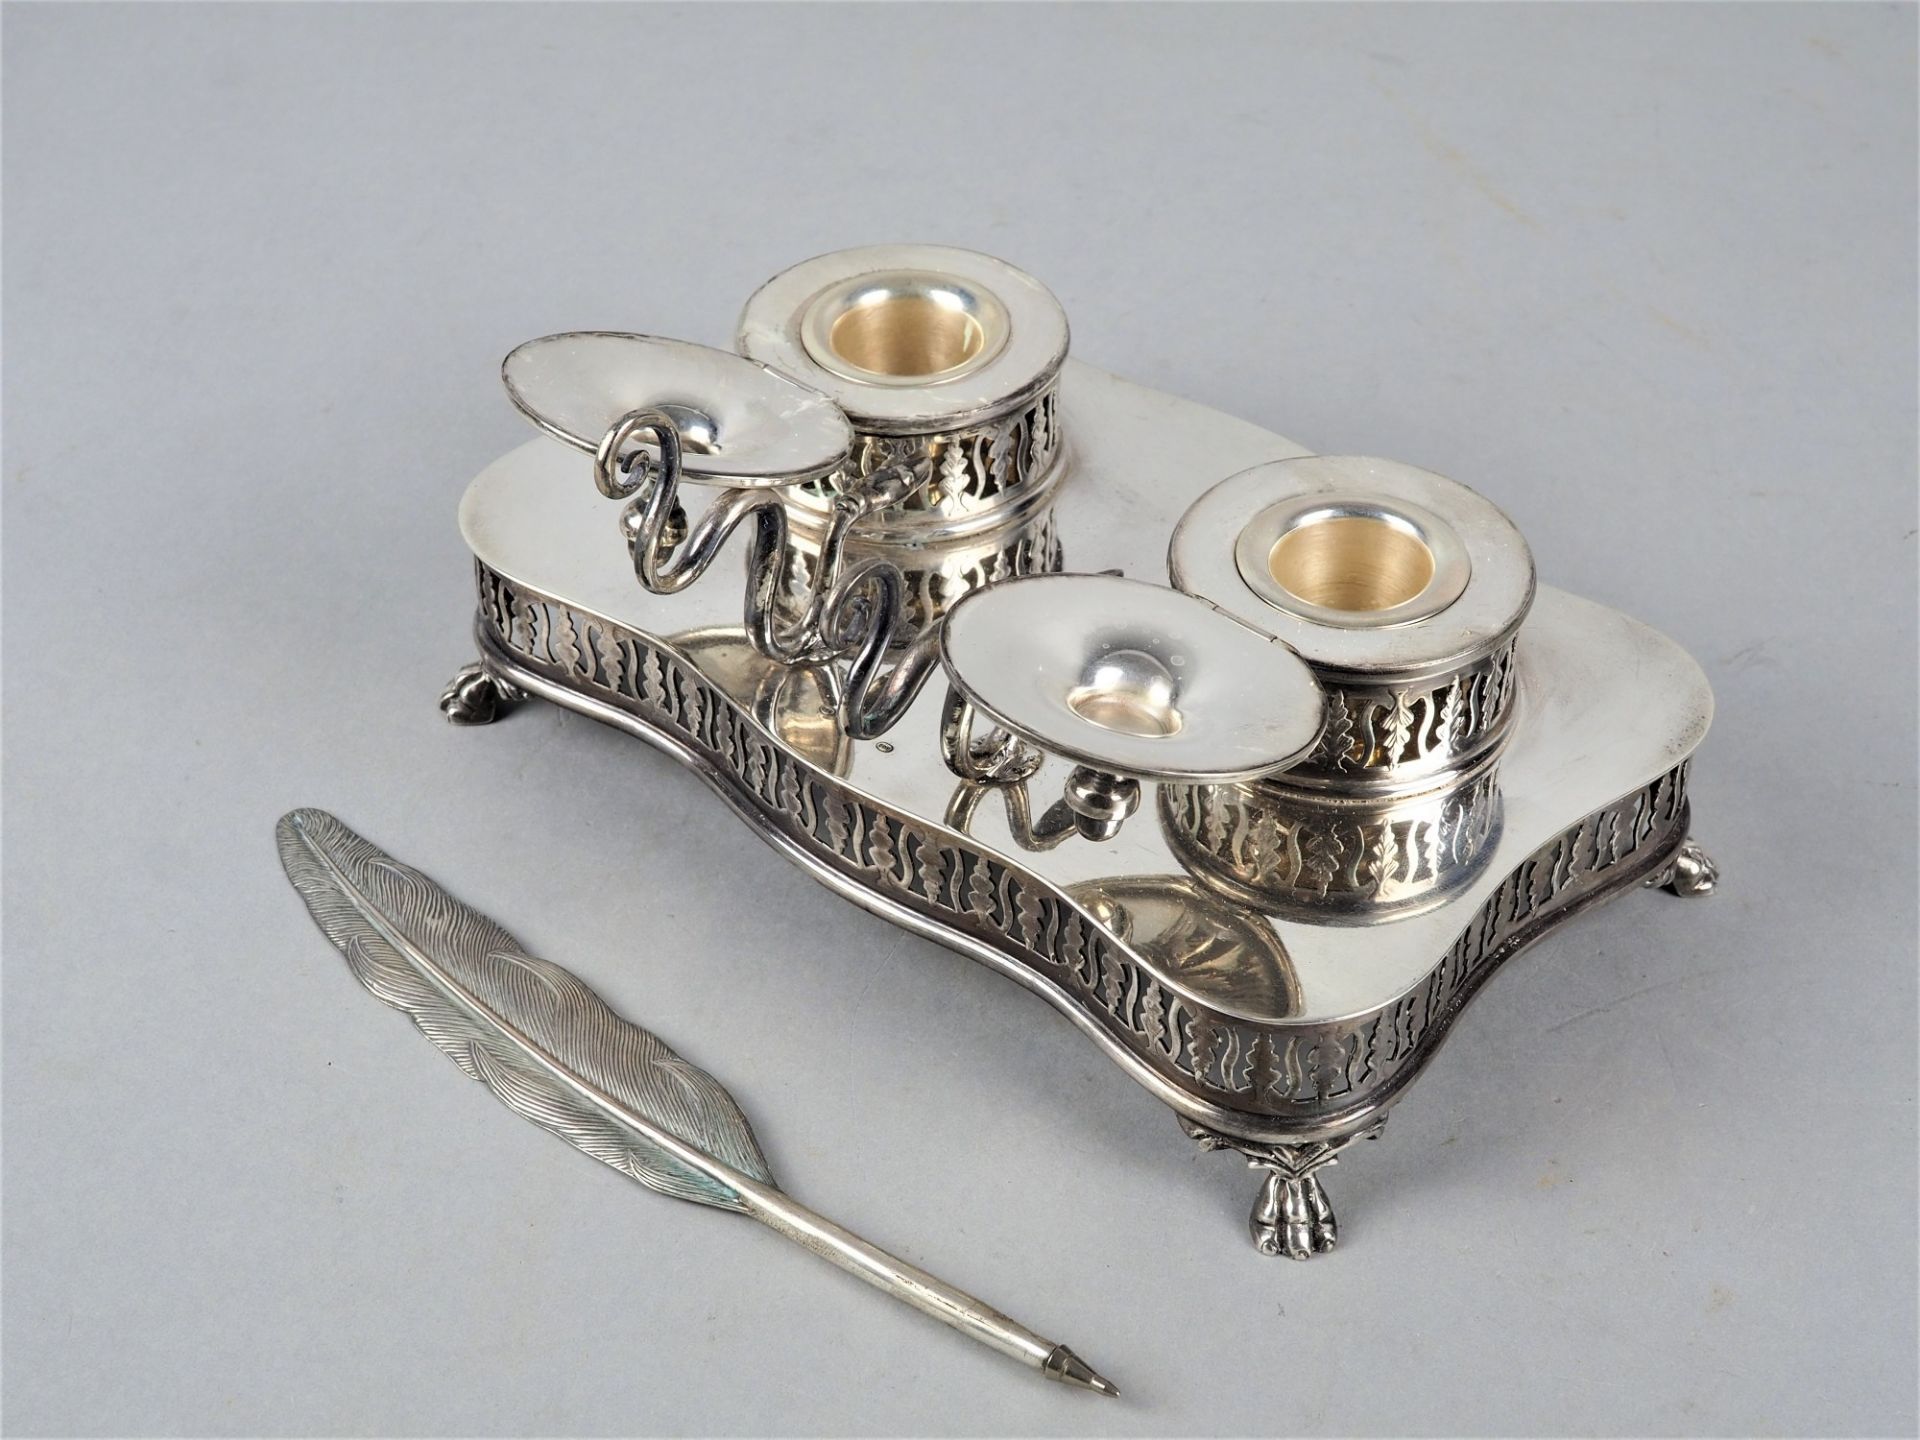 Antique silver writing set, Italy - Image 2 of 3